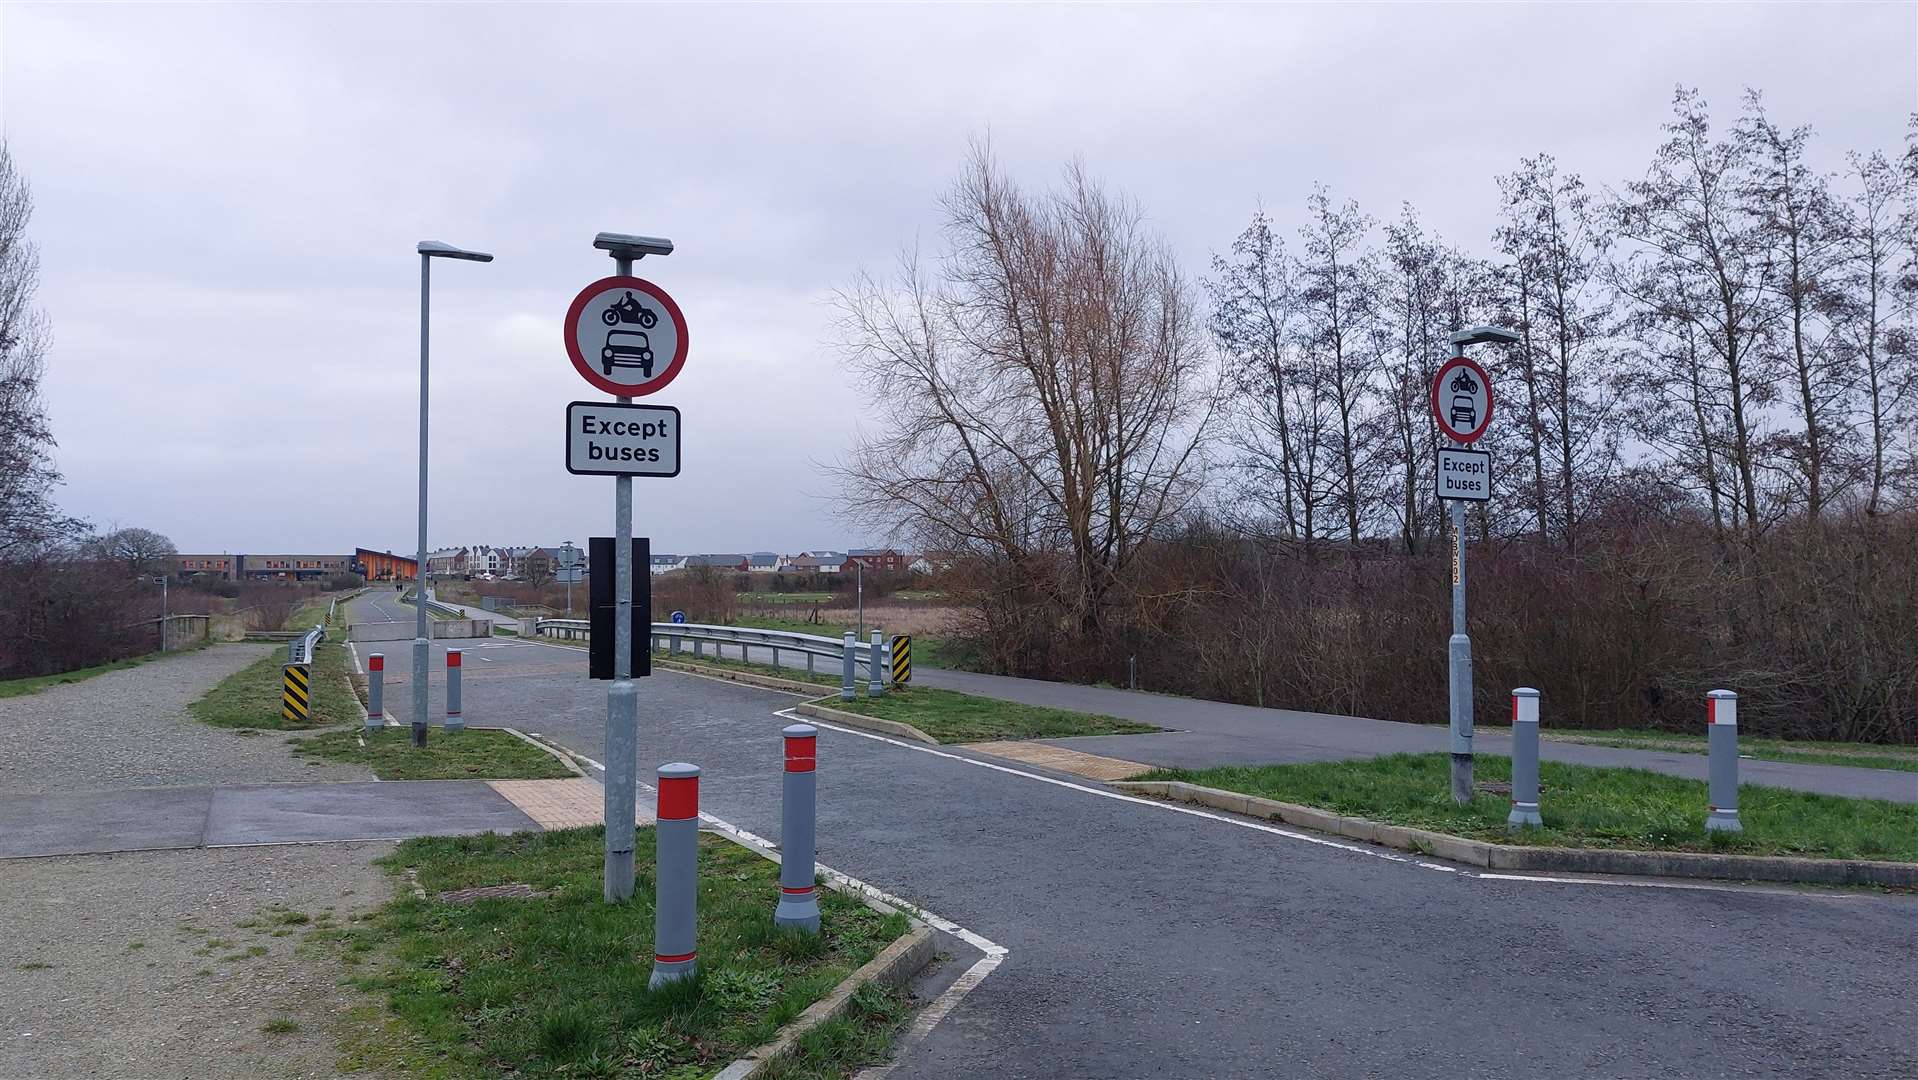 Avocet Way, which connects Bridgefield and Finberry in Ashford is closed to traffic. Once opened it will be a bus-only route